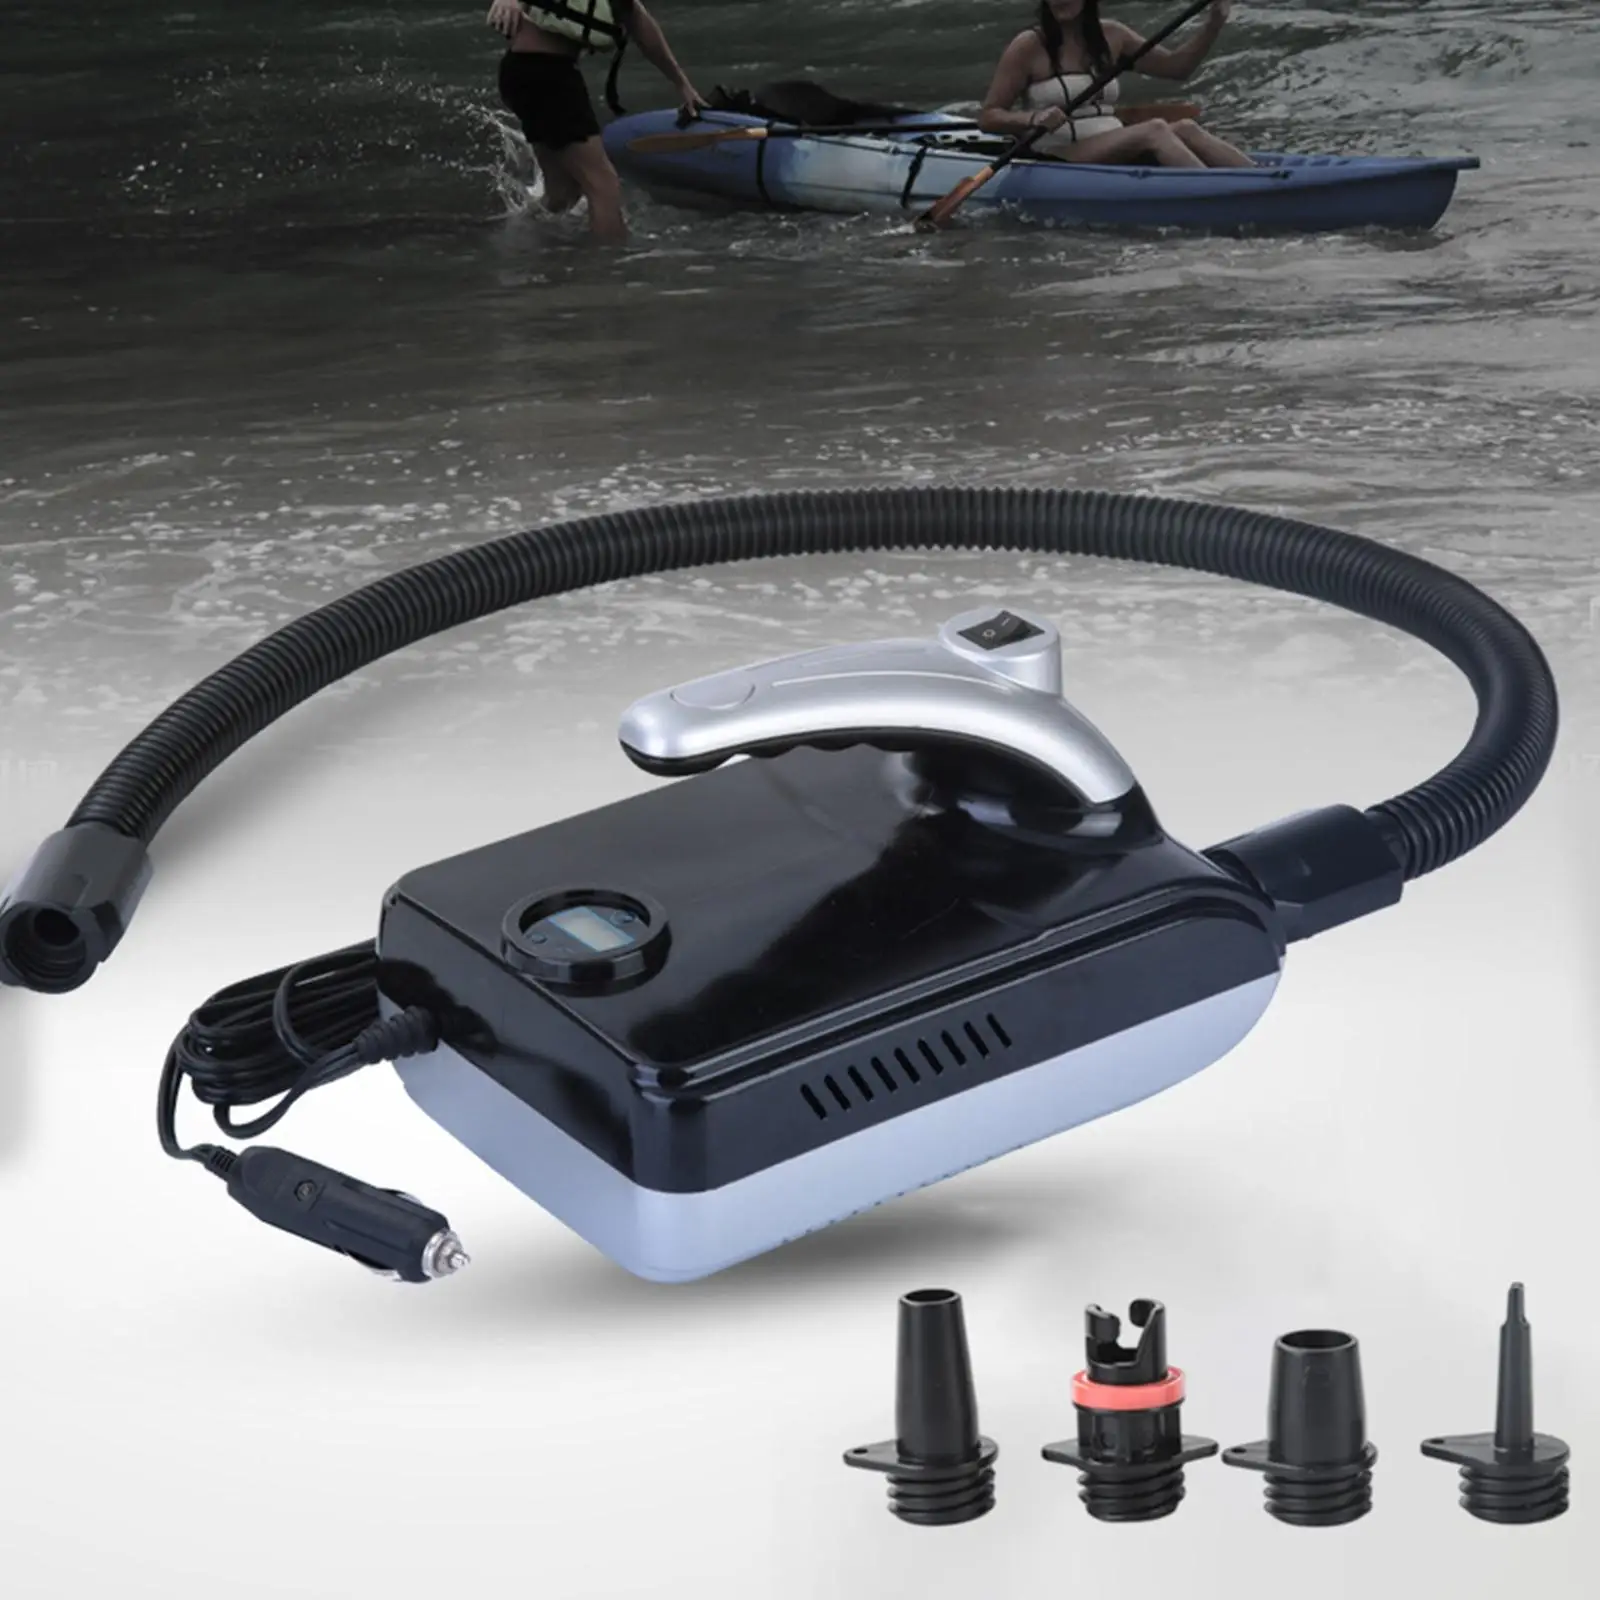 12PSI Digital Electric Air Pump Inflator for Outdoor Paddle Board